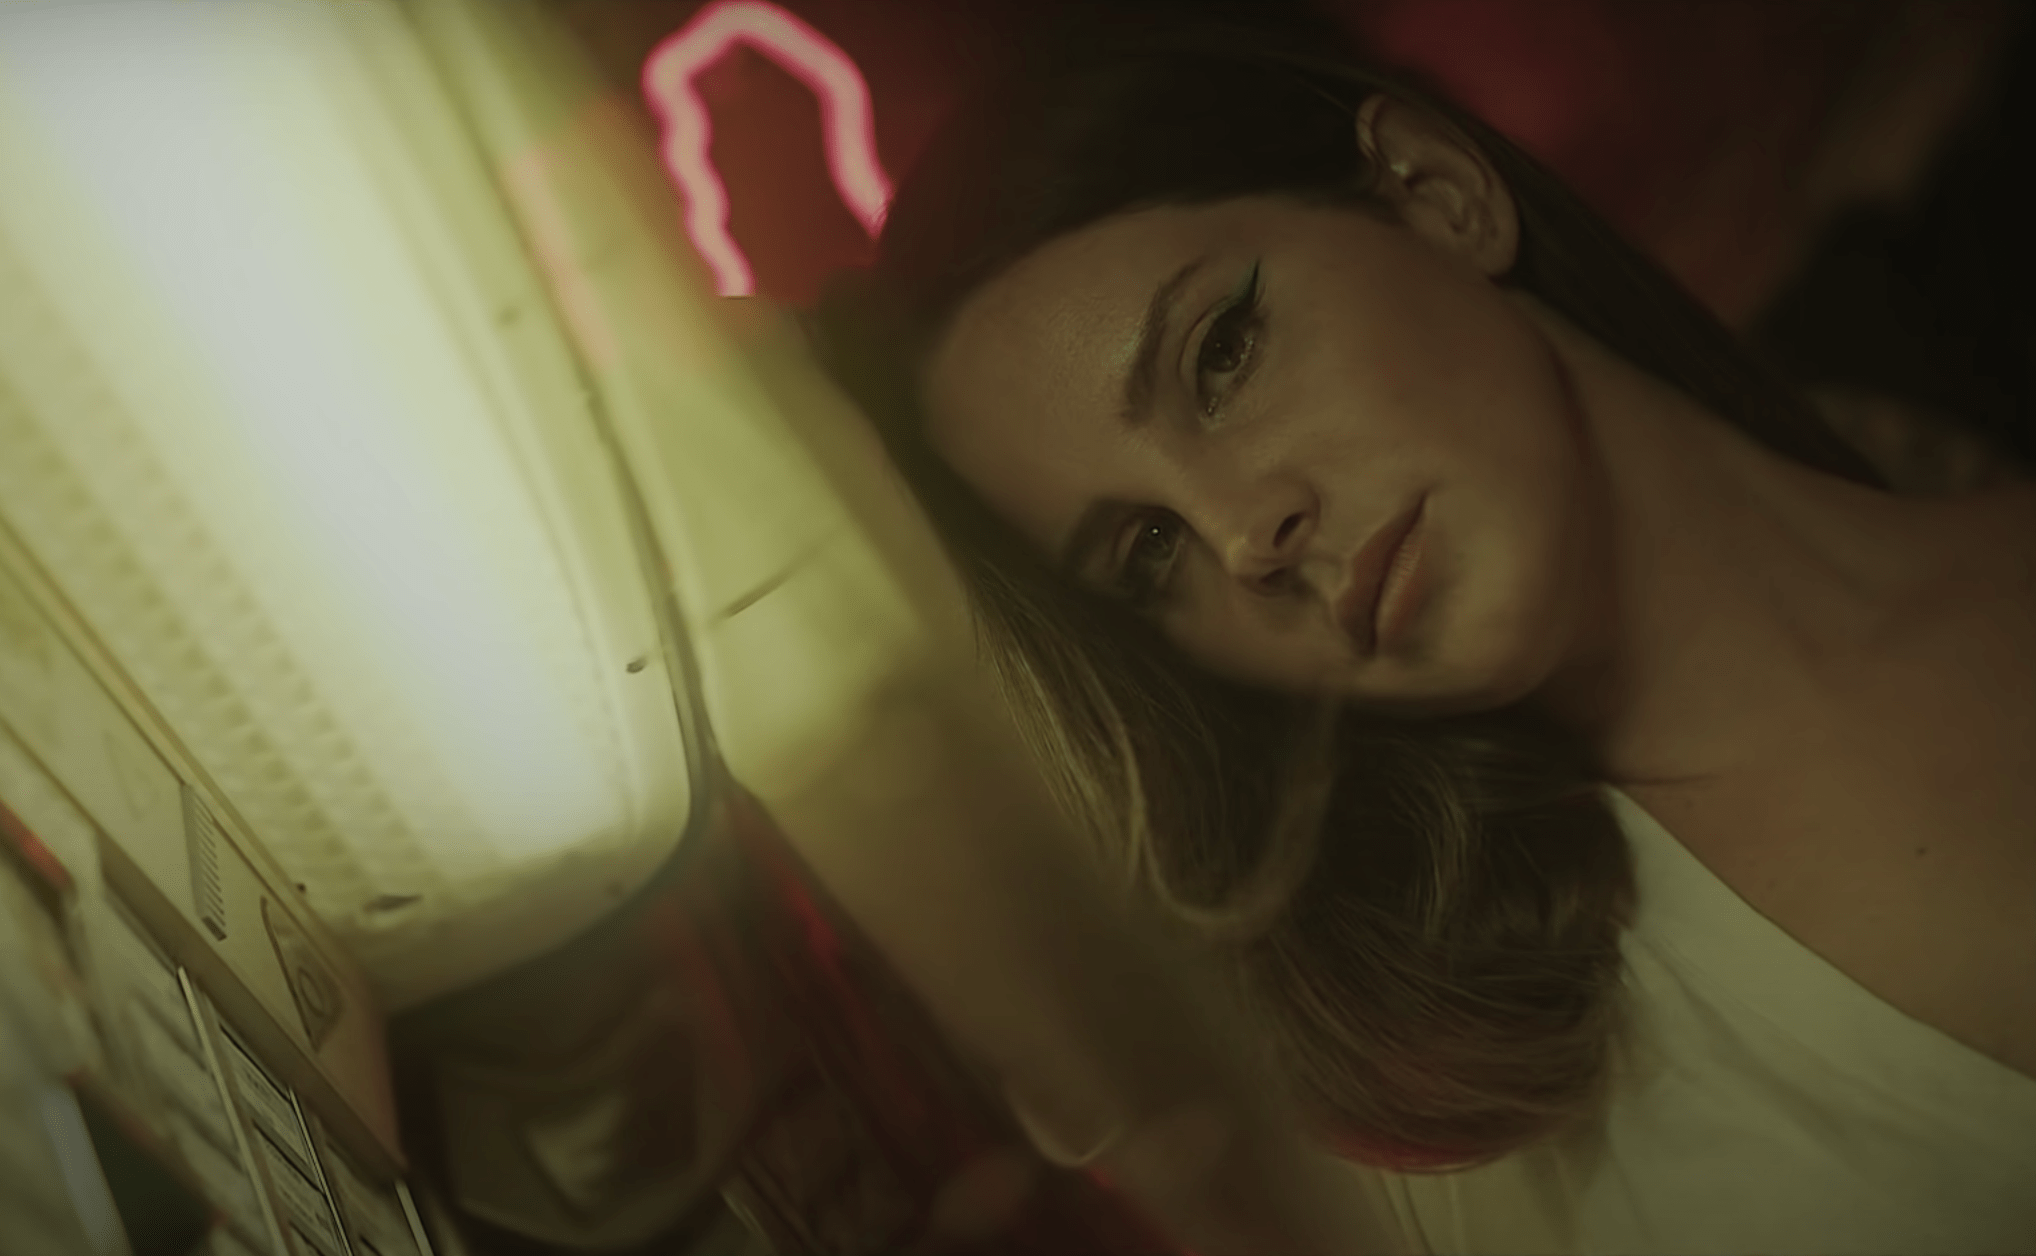 A woman laying on a bed with a neon sign in the background - Lana Del Rey